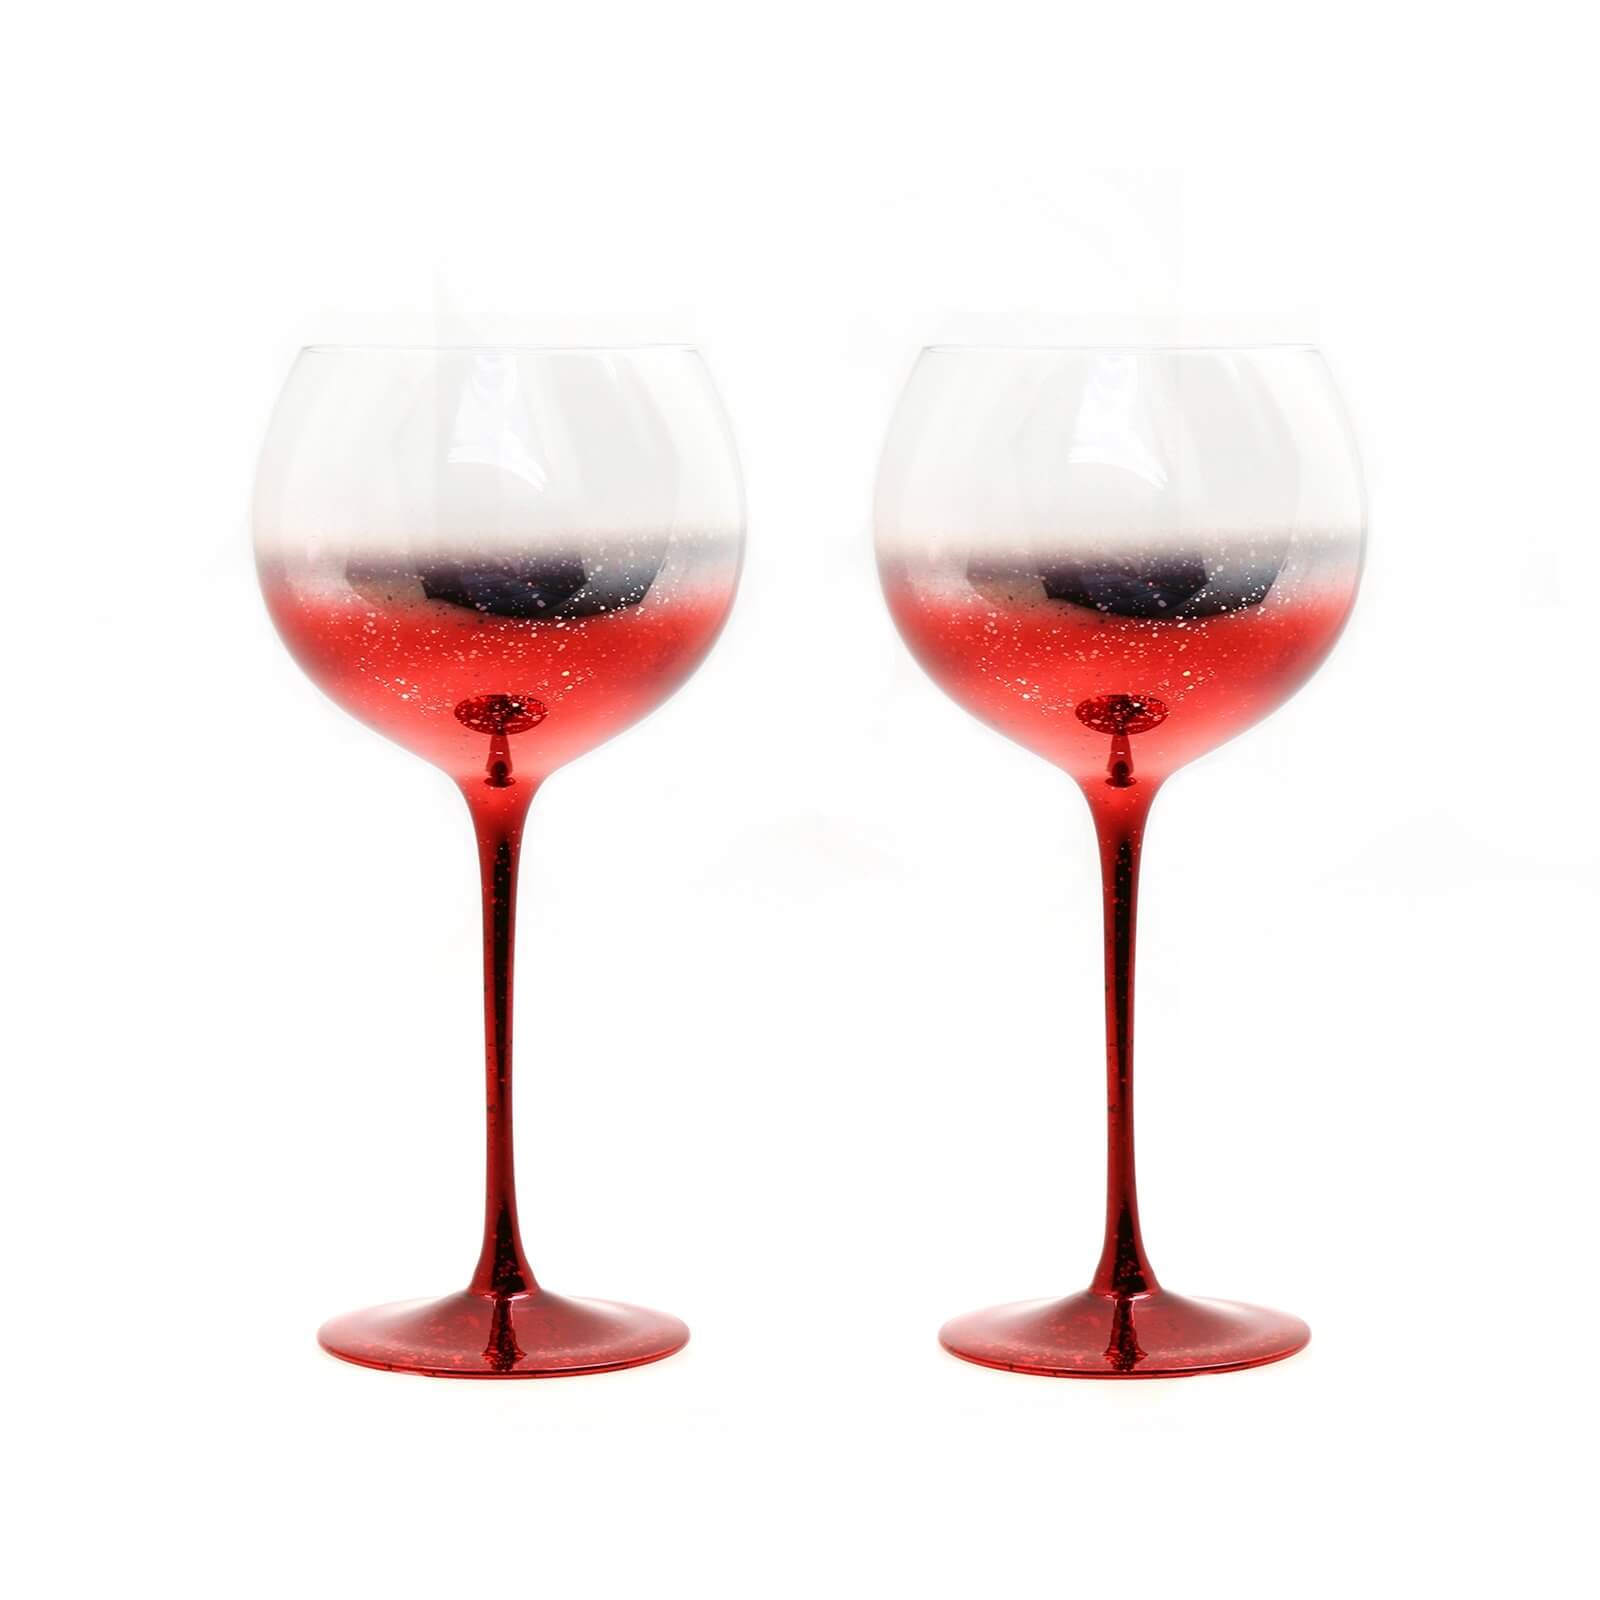 Gin Glasses - Set of 2 - Red